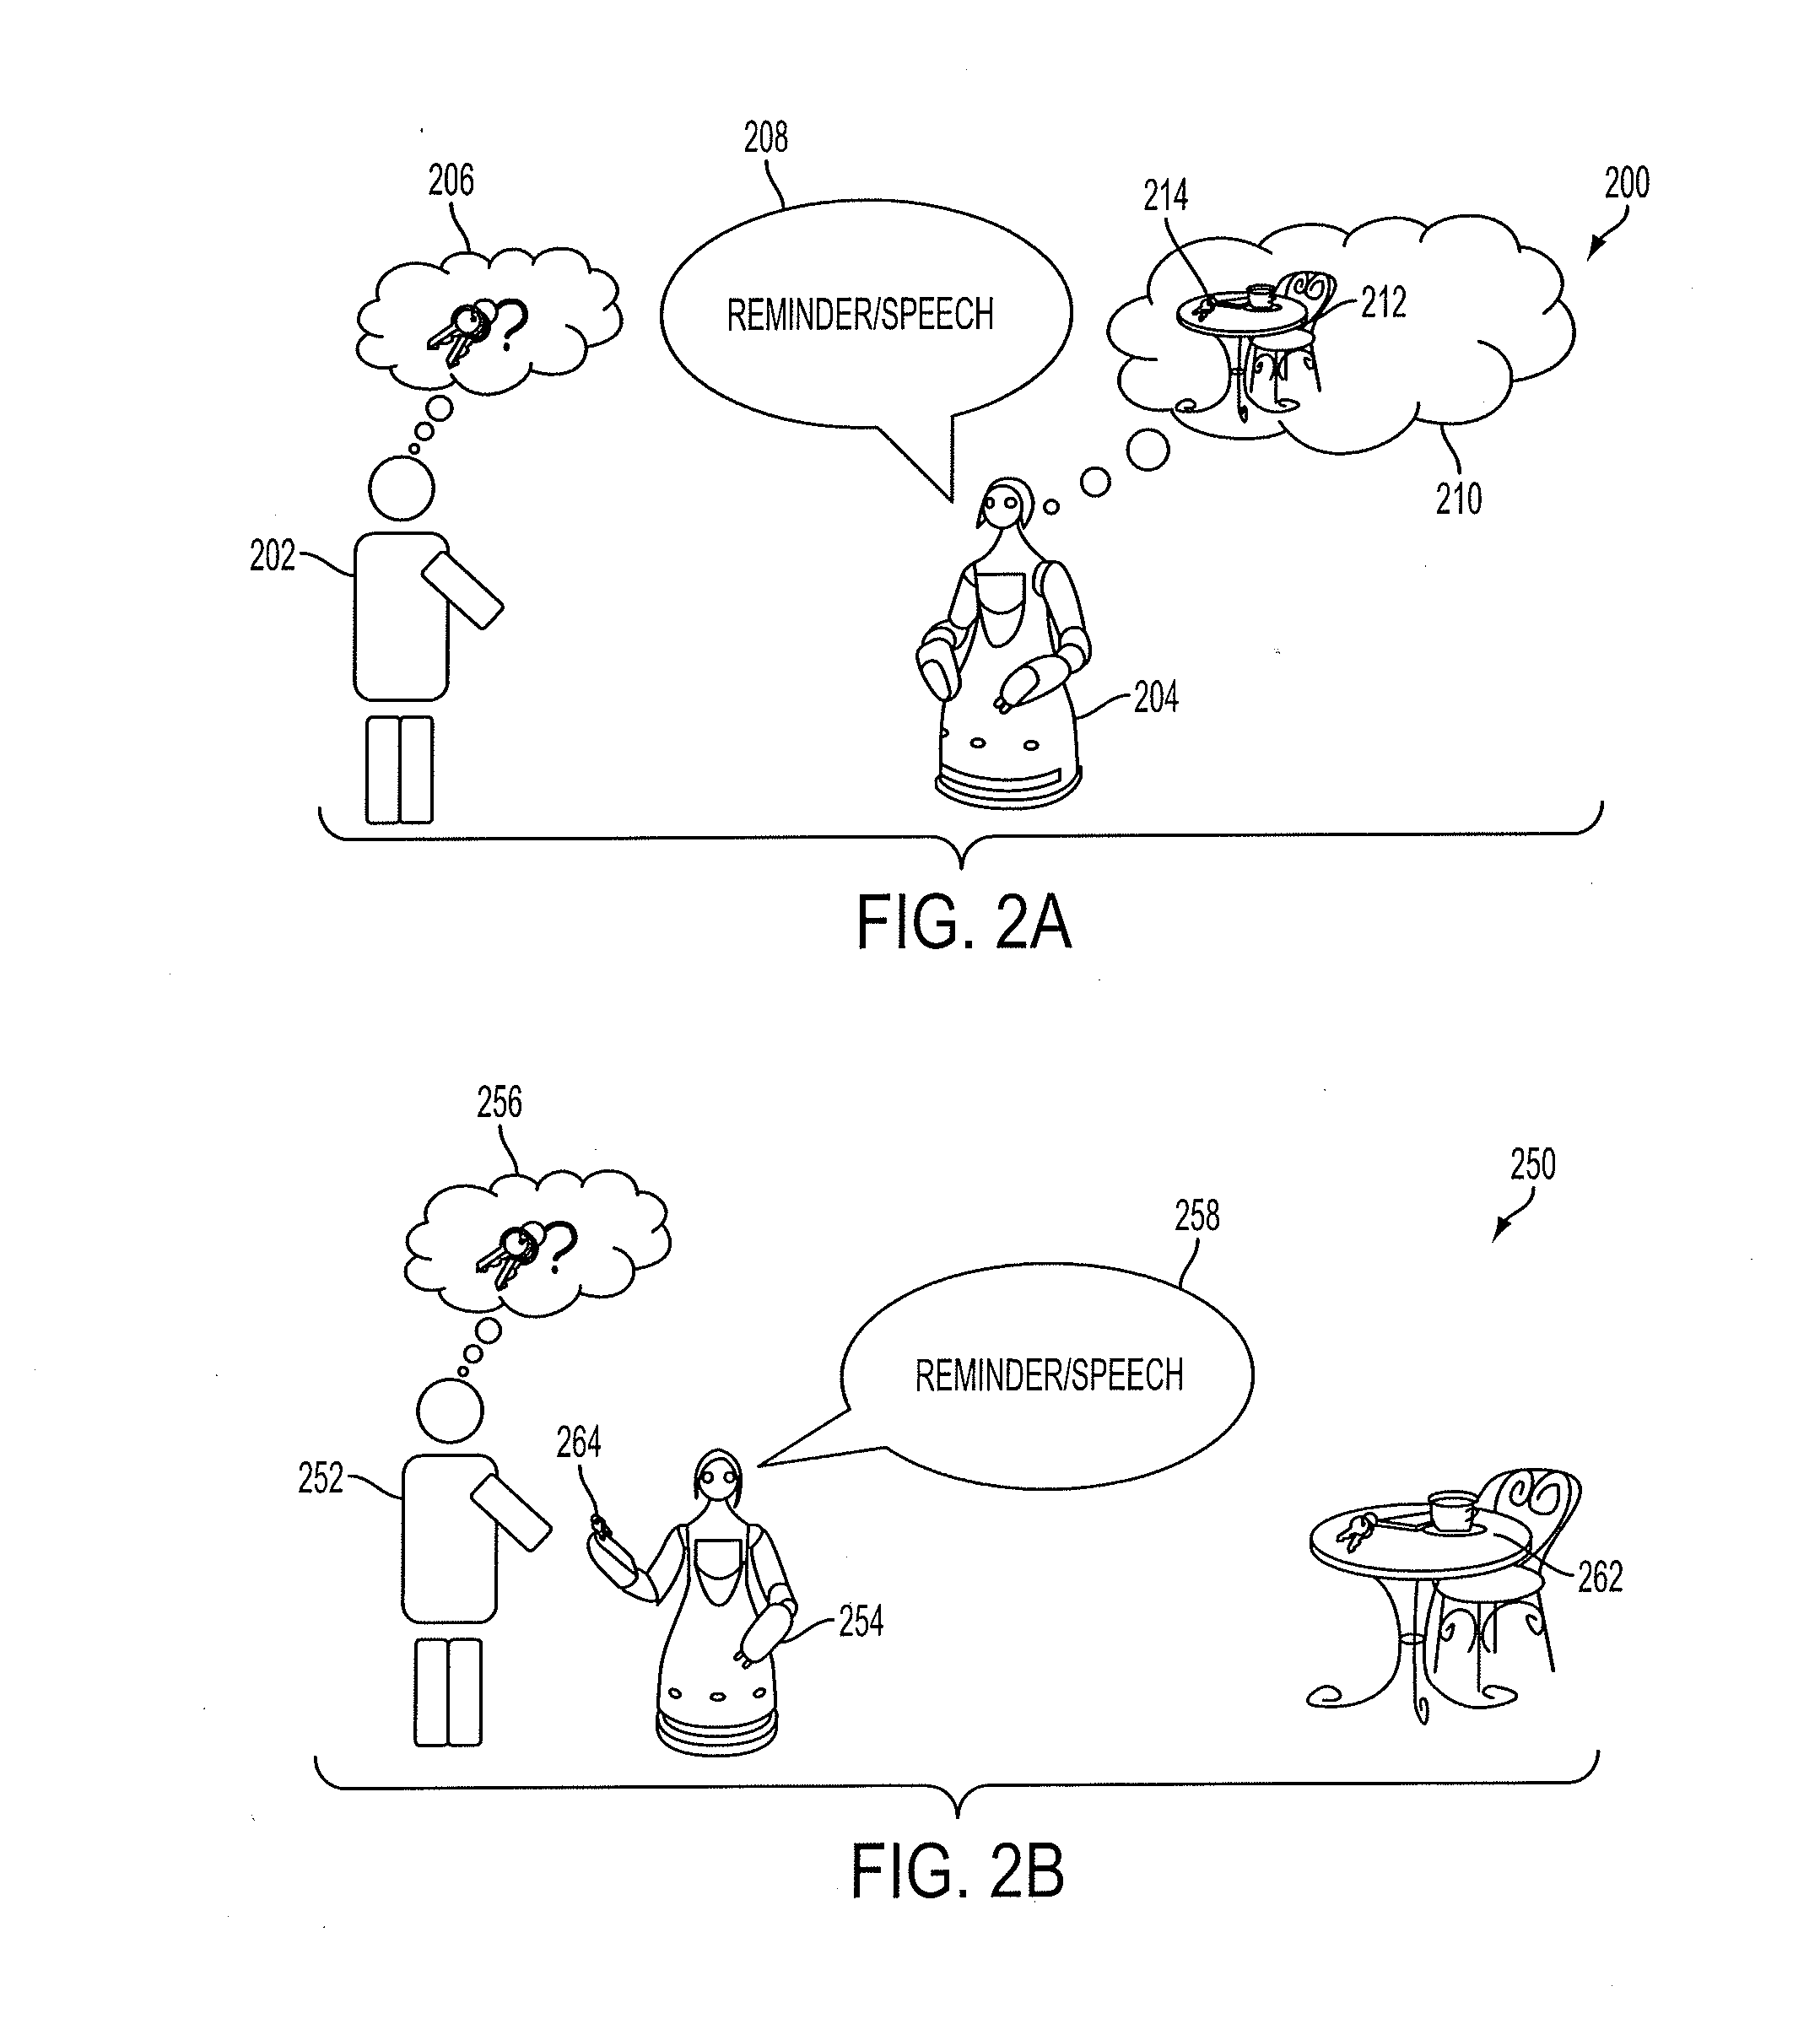 Computer-based method and system for providing active and automatic personal assistance using a robotic device/platform